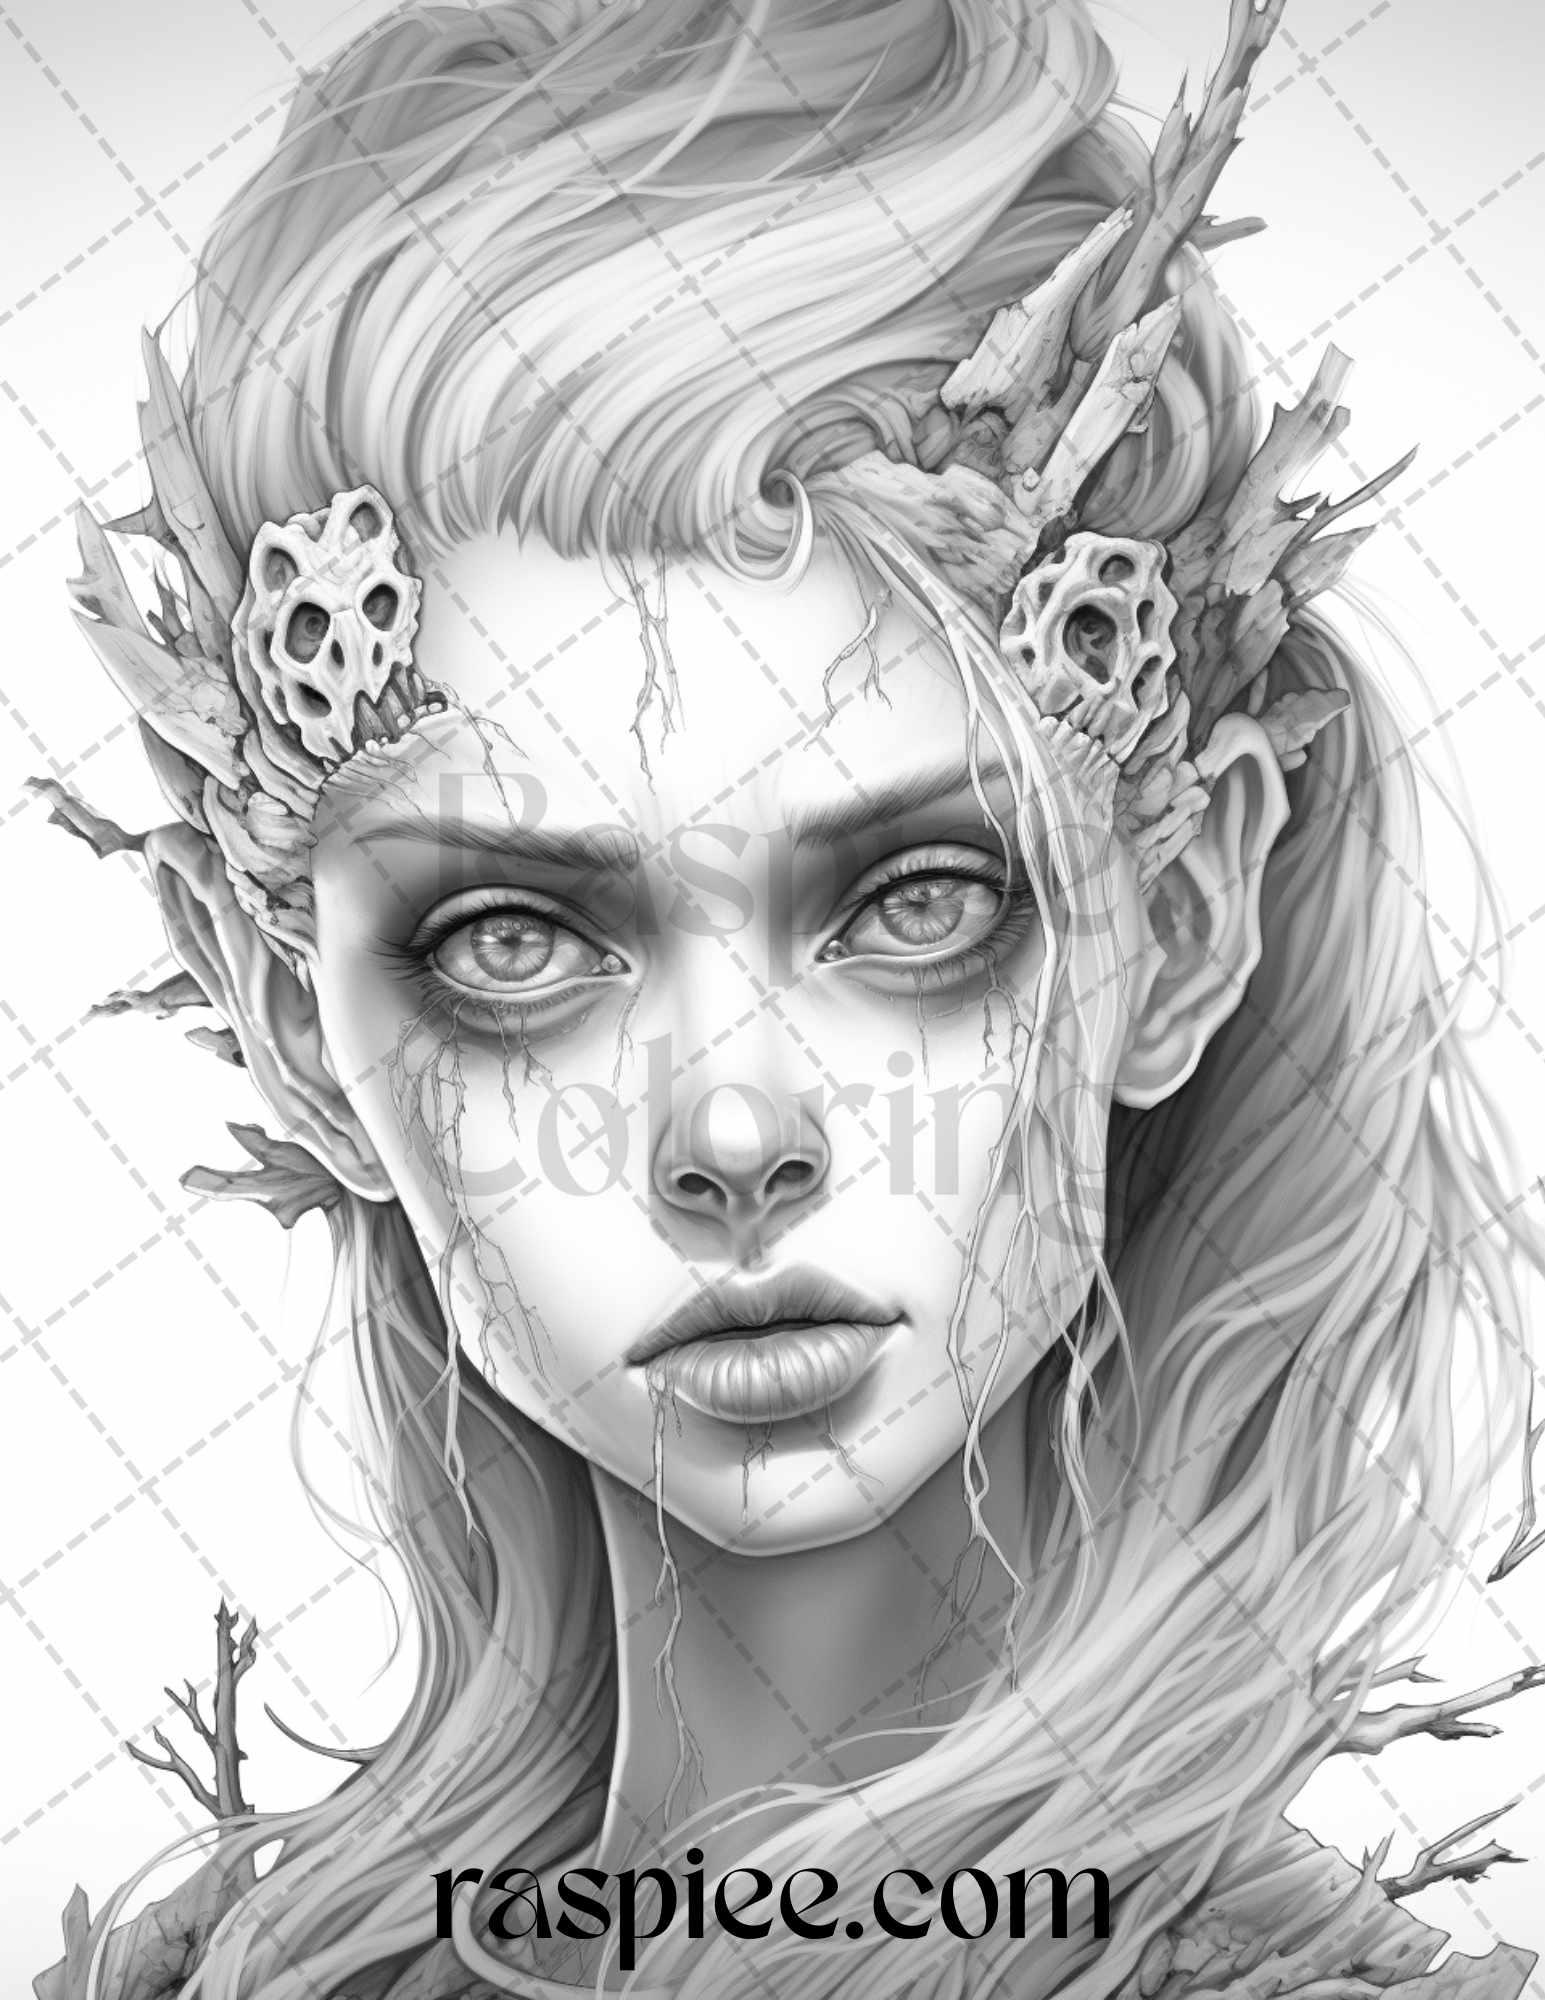 Halloween Zombie Fairy Coloring Page, Grayscale Coloring Printable, Adult Coloring Art, Scary Gothic Coloring, Halloween Decor DIY, Printable Coloring Book, Ghostly Coloring Sheet, Halloween Home Decor, Gothic Fairyland Printable